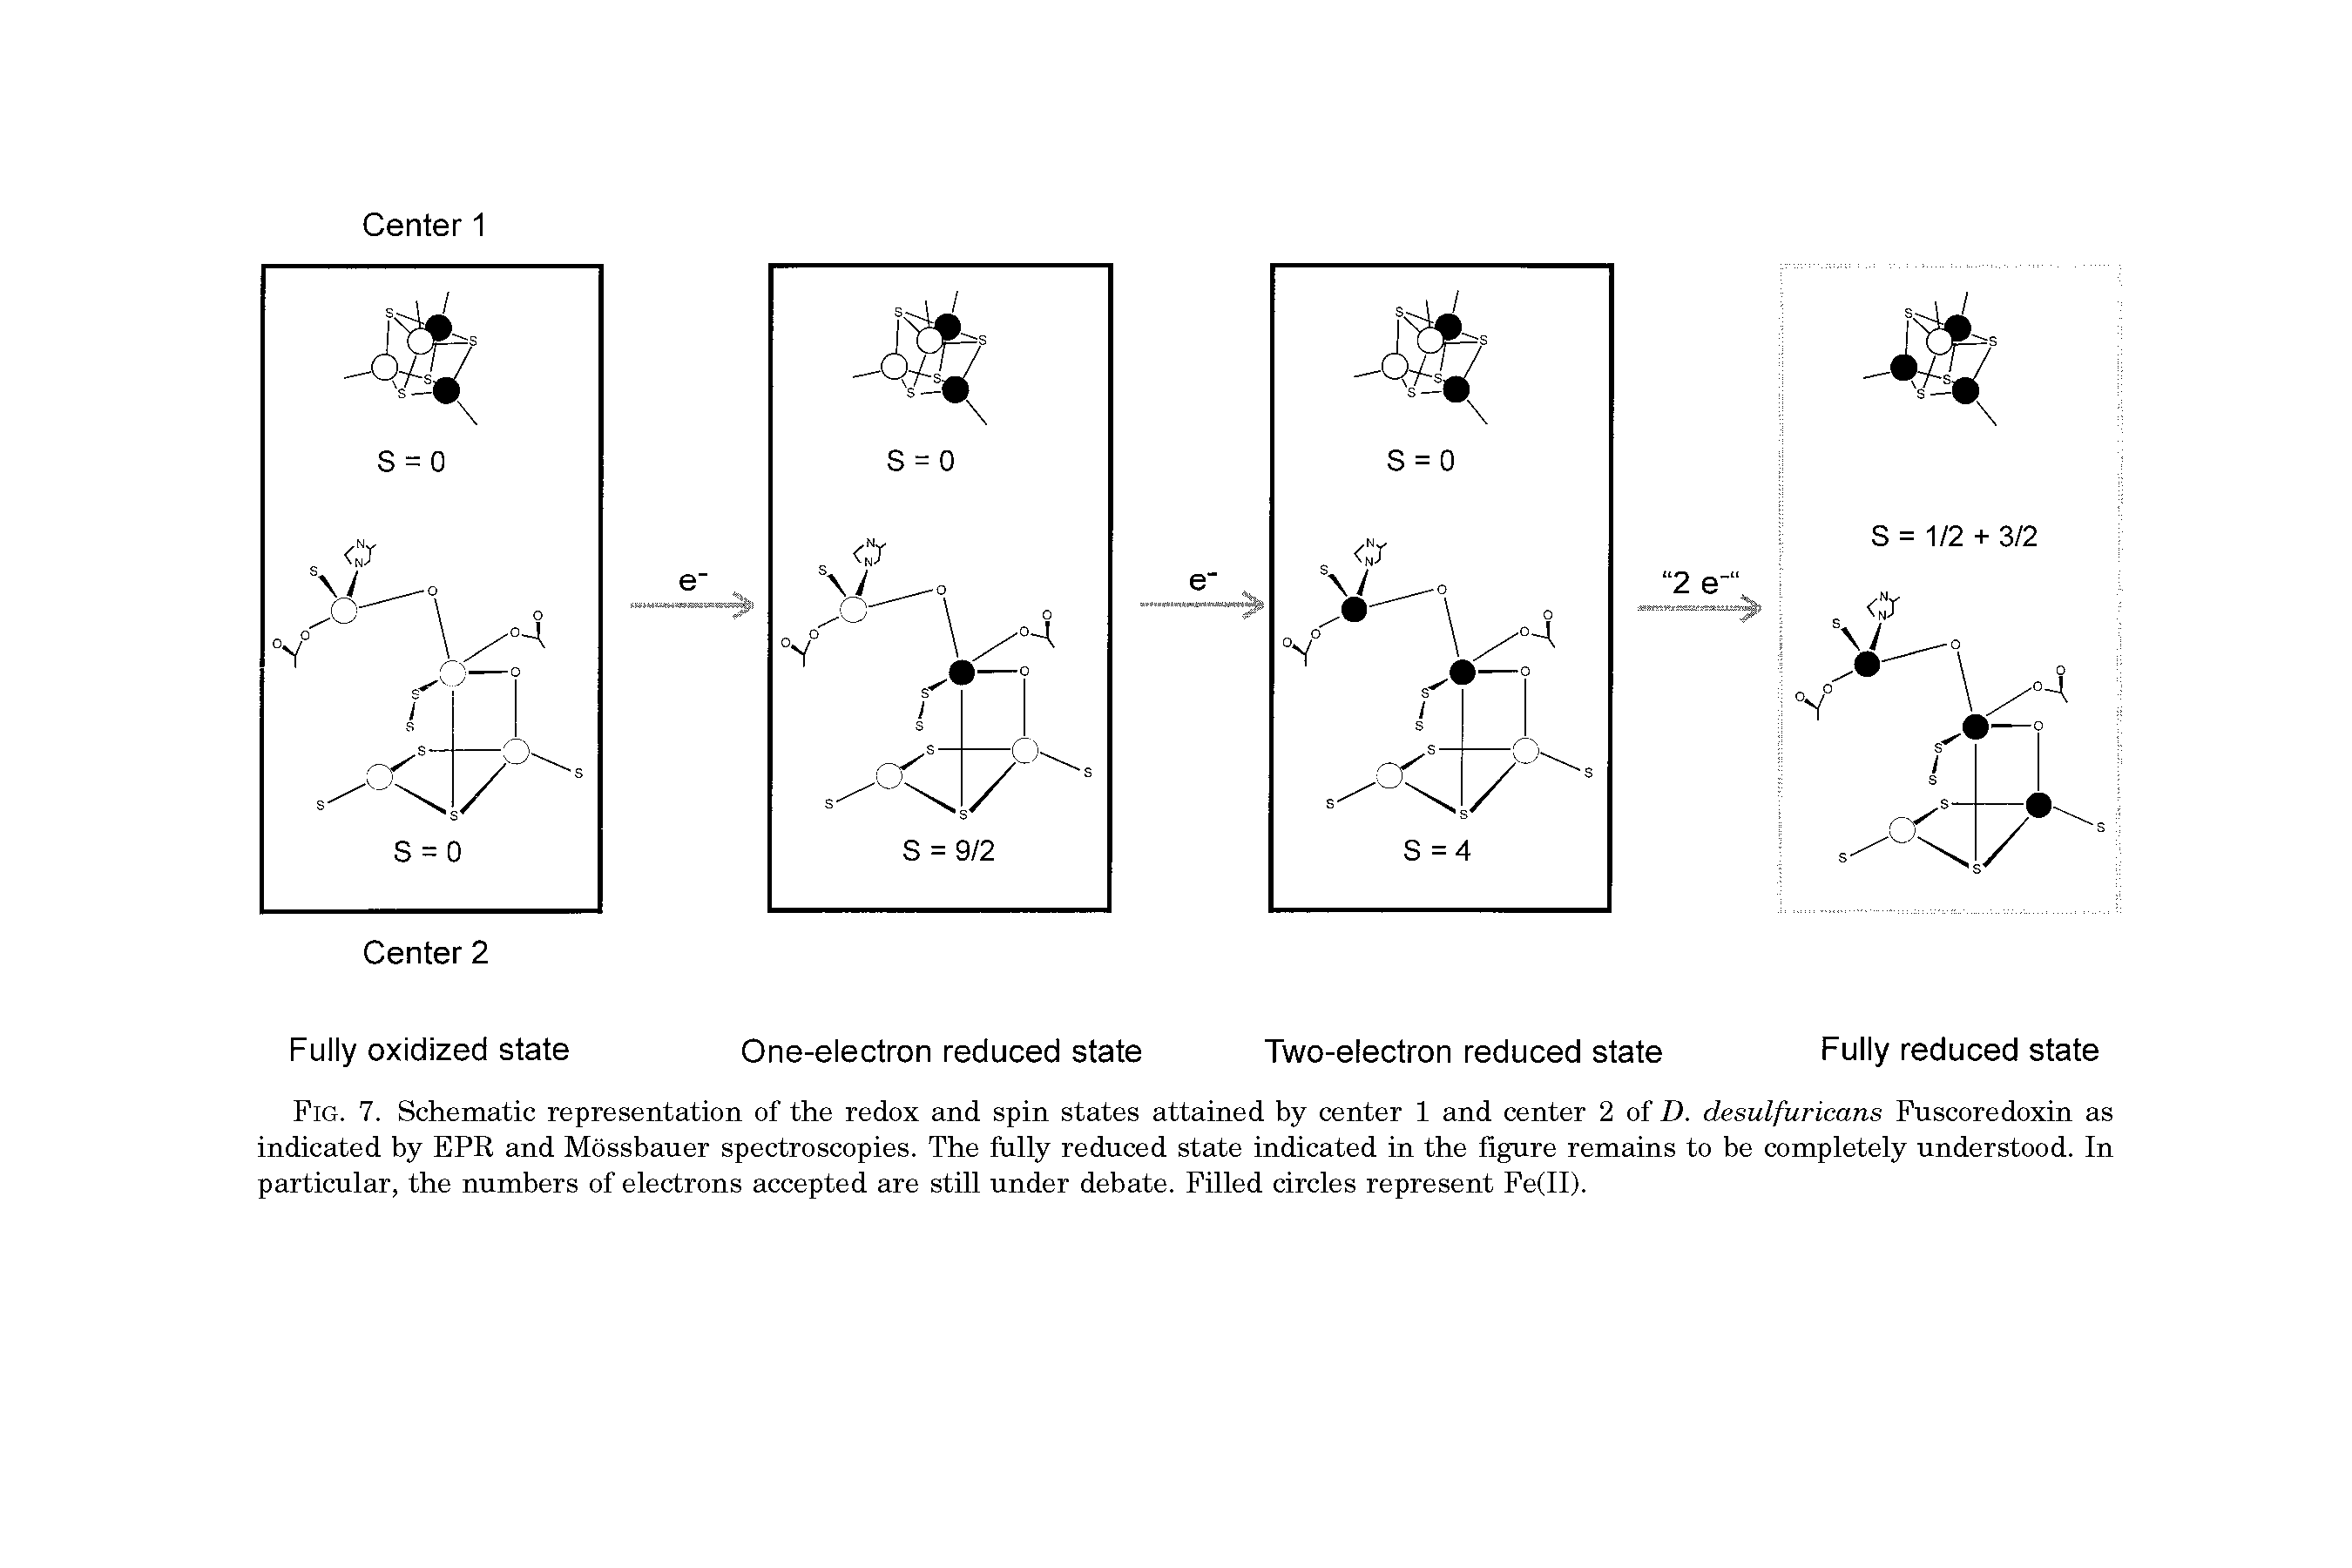 Fig. 7. Schematic representation of the redox and spin states attained by center 1 and center 2 of D. desulfuricans Fuscoredoxin as indicated by EPR and Mossbauer spectroscopies. The fully reduced state indicated in the figure remains to be completely understood. In particular, the numbers of electrons accepted are still under debate. Filled circles represent Fe(II).